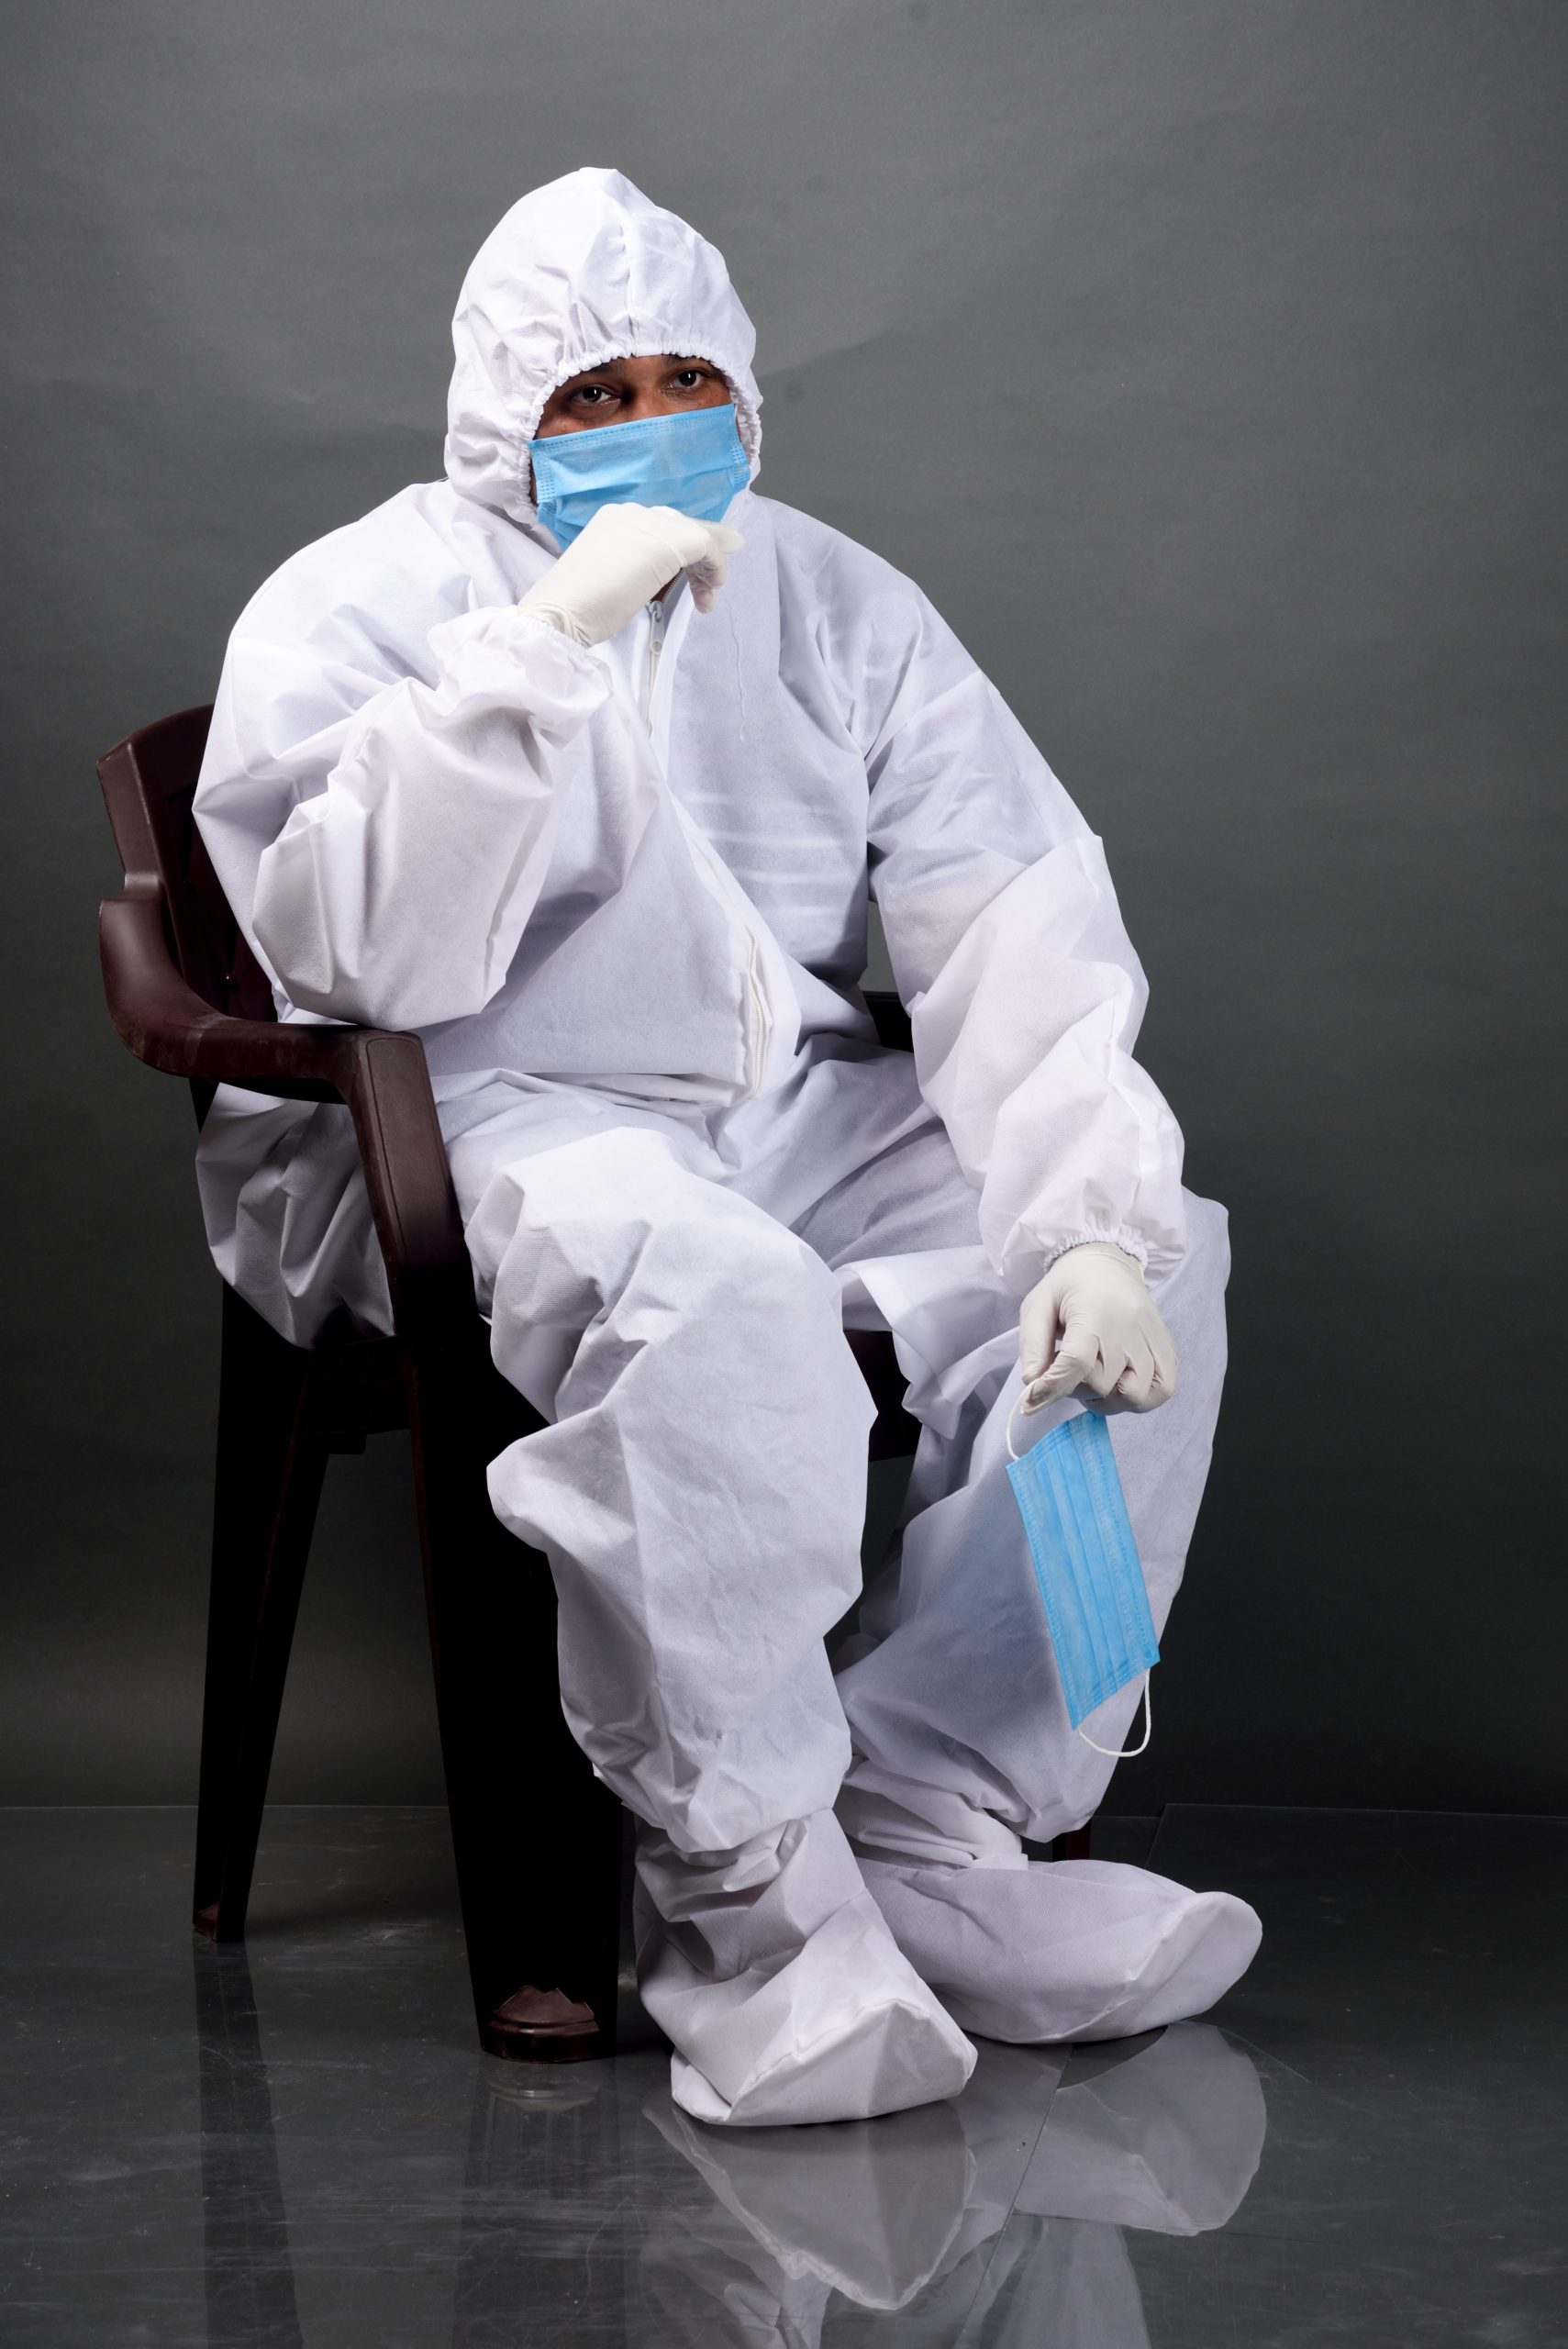 Man on chair in PPE kit